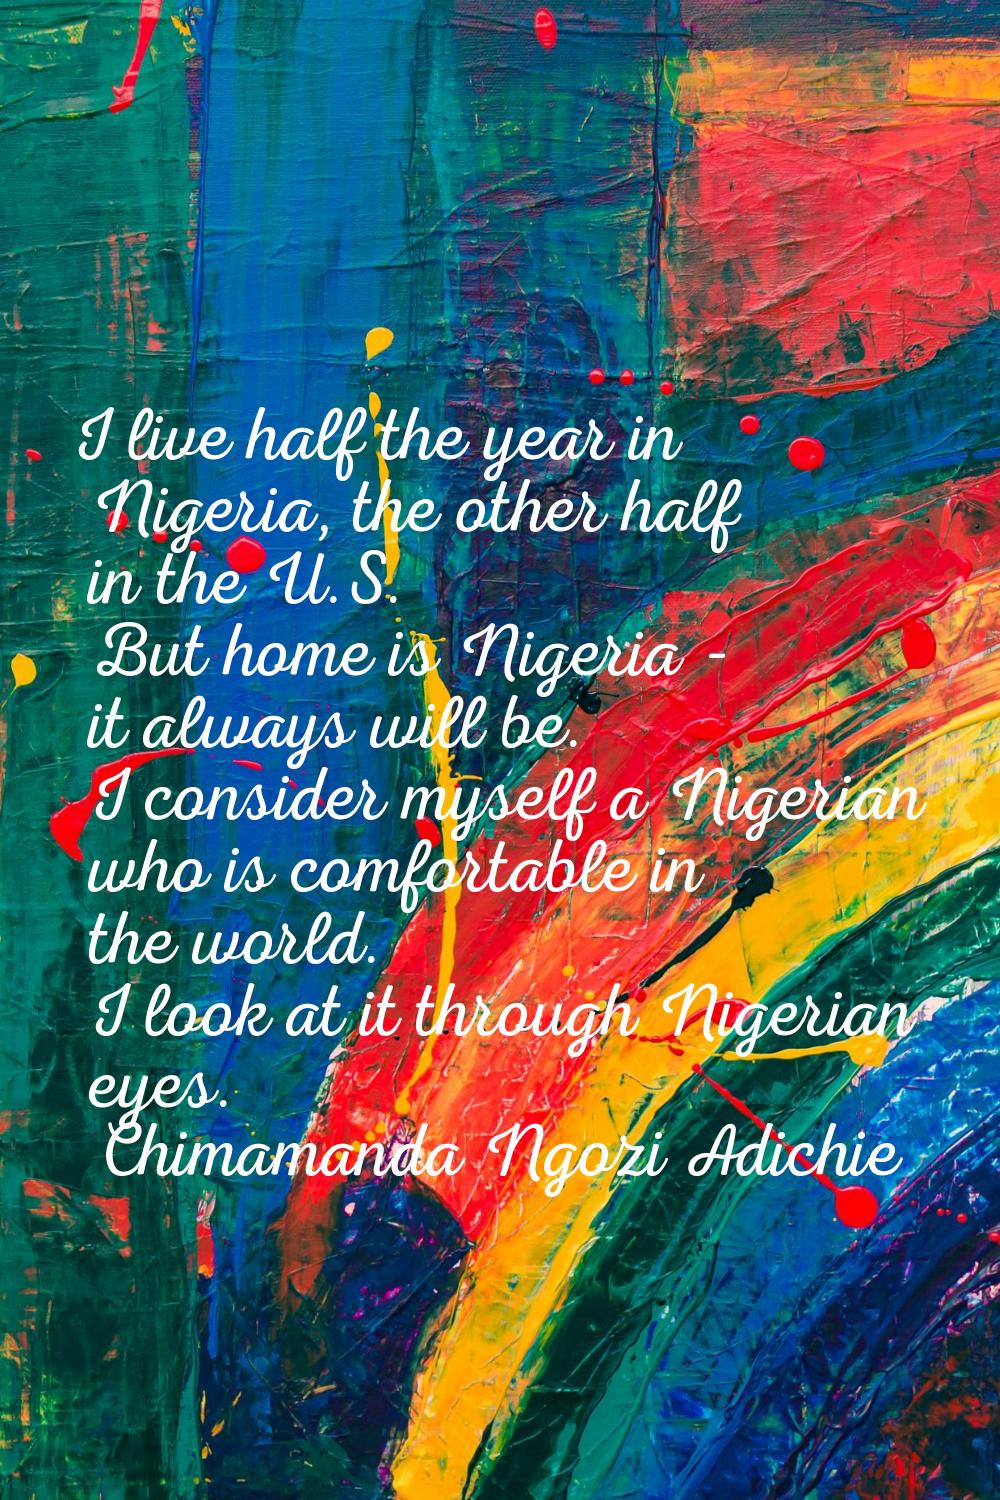 I live half the year in Nigeria, the other half in the U.S. But home is Nigeria - it always will be